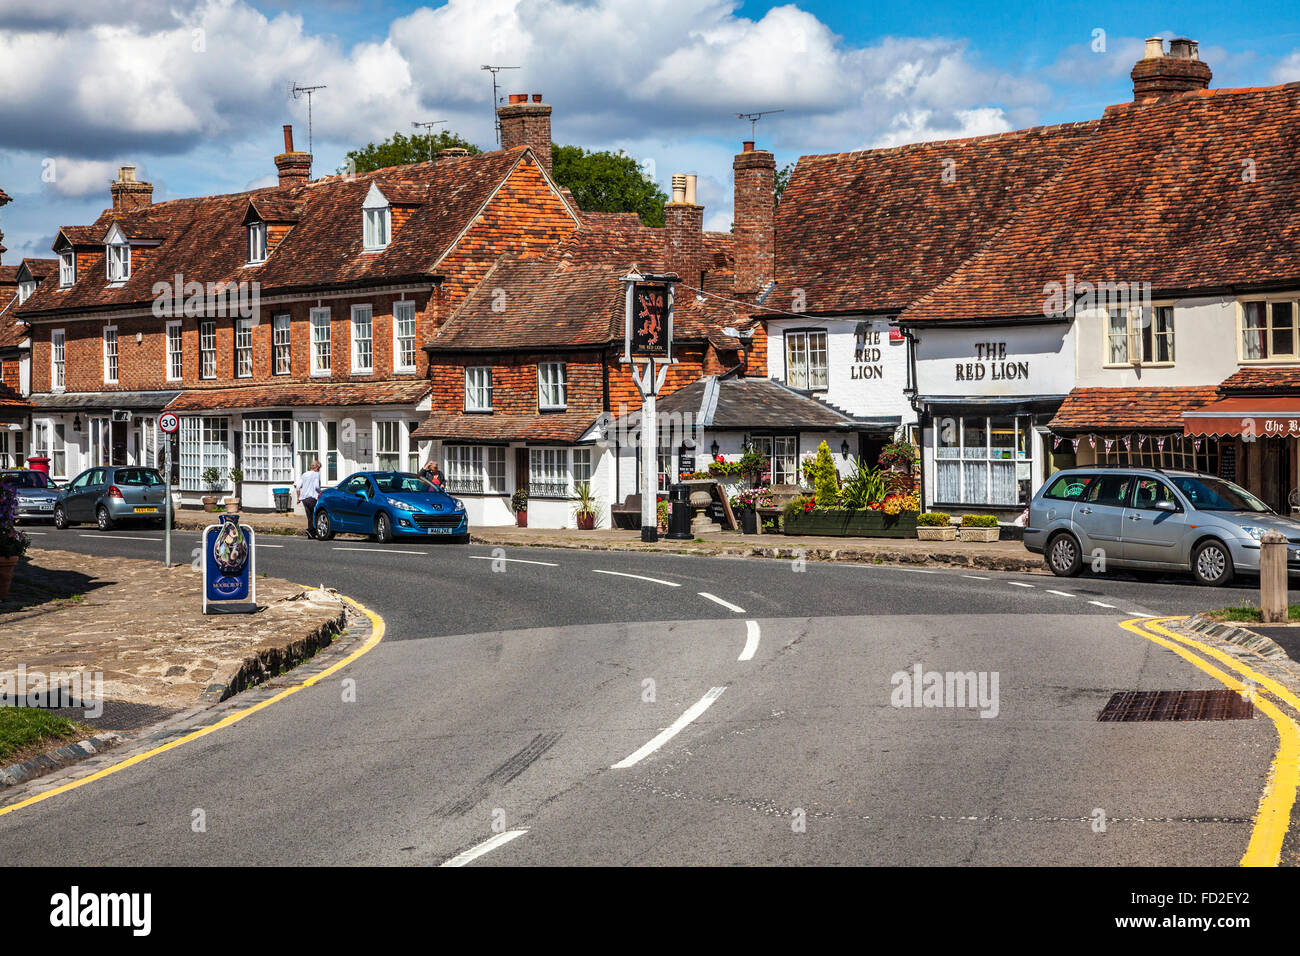 The main road through the pretty village of Biddenden in Kent. Stock Photo